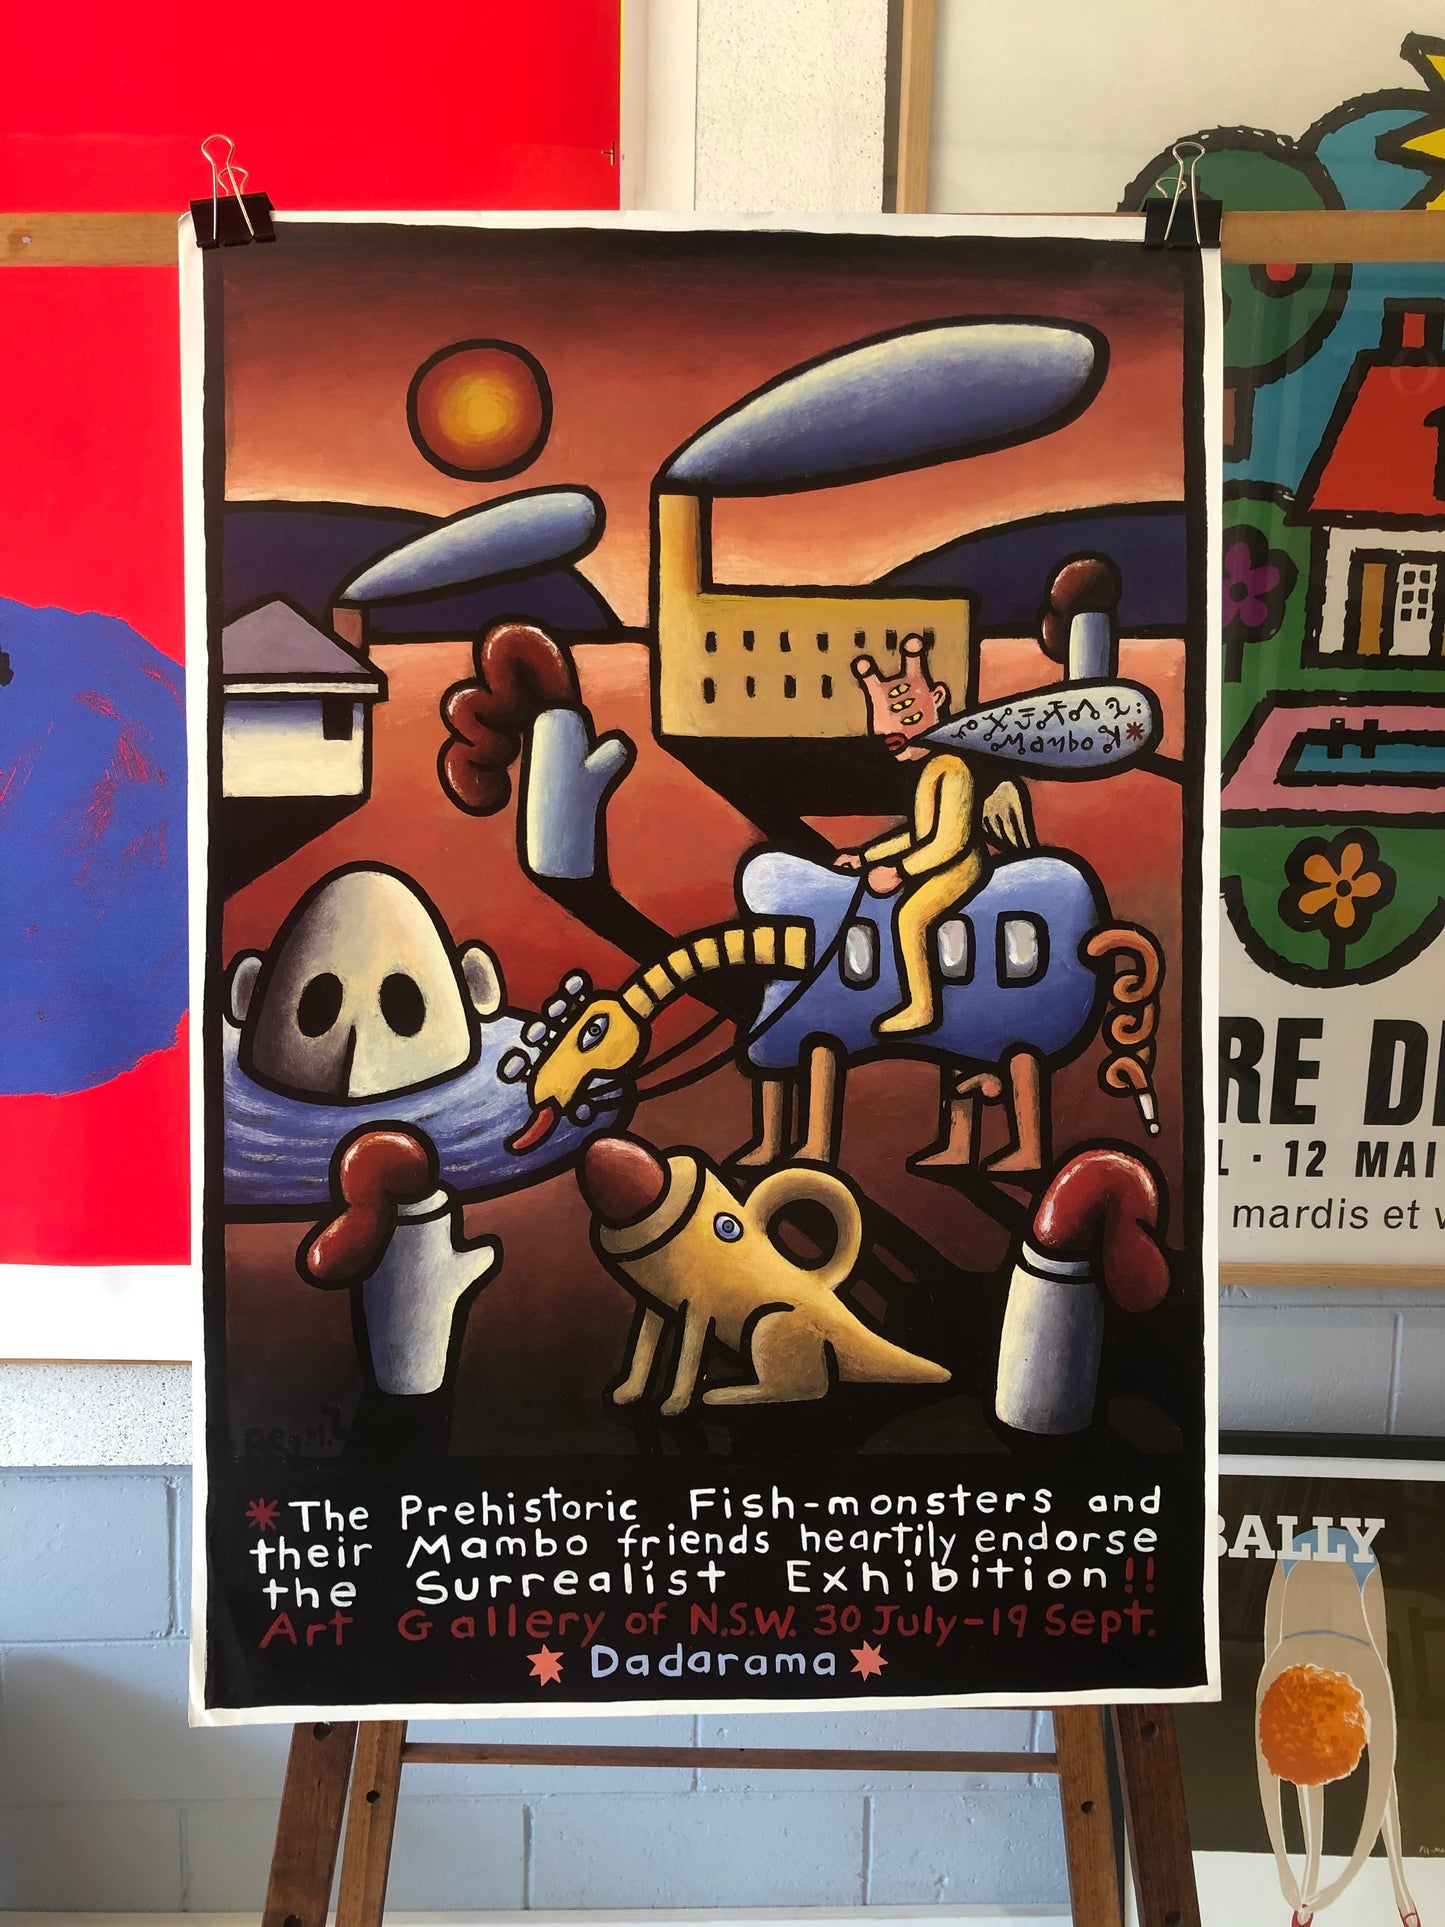 Mambo Exhibition Poster, Art Gallery of NSW